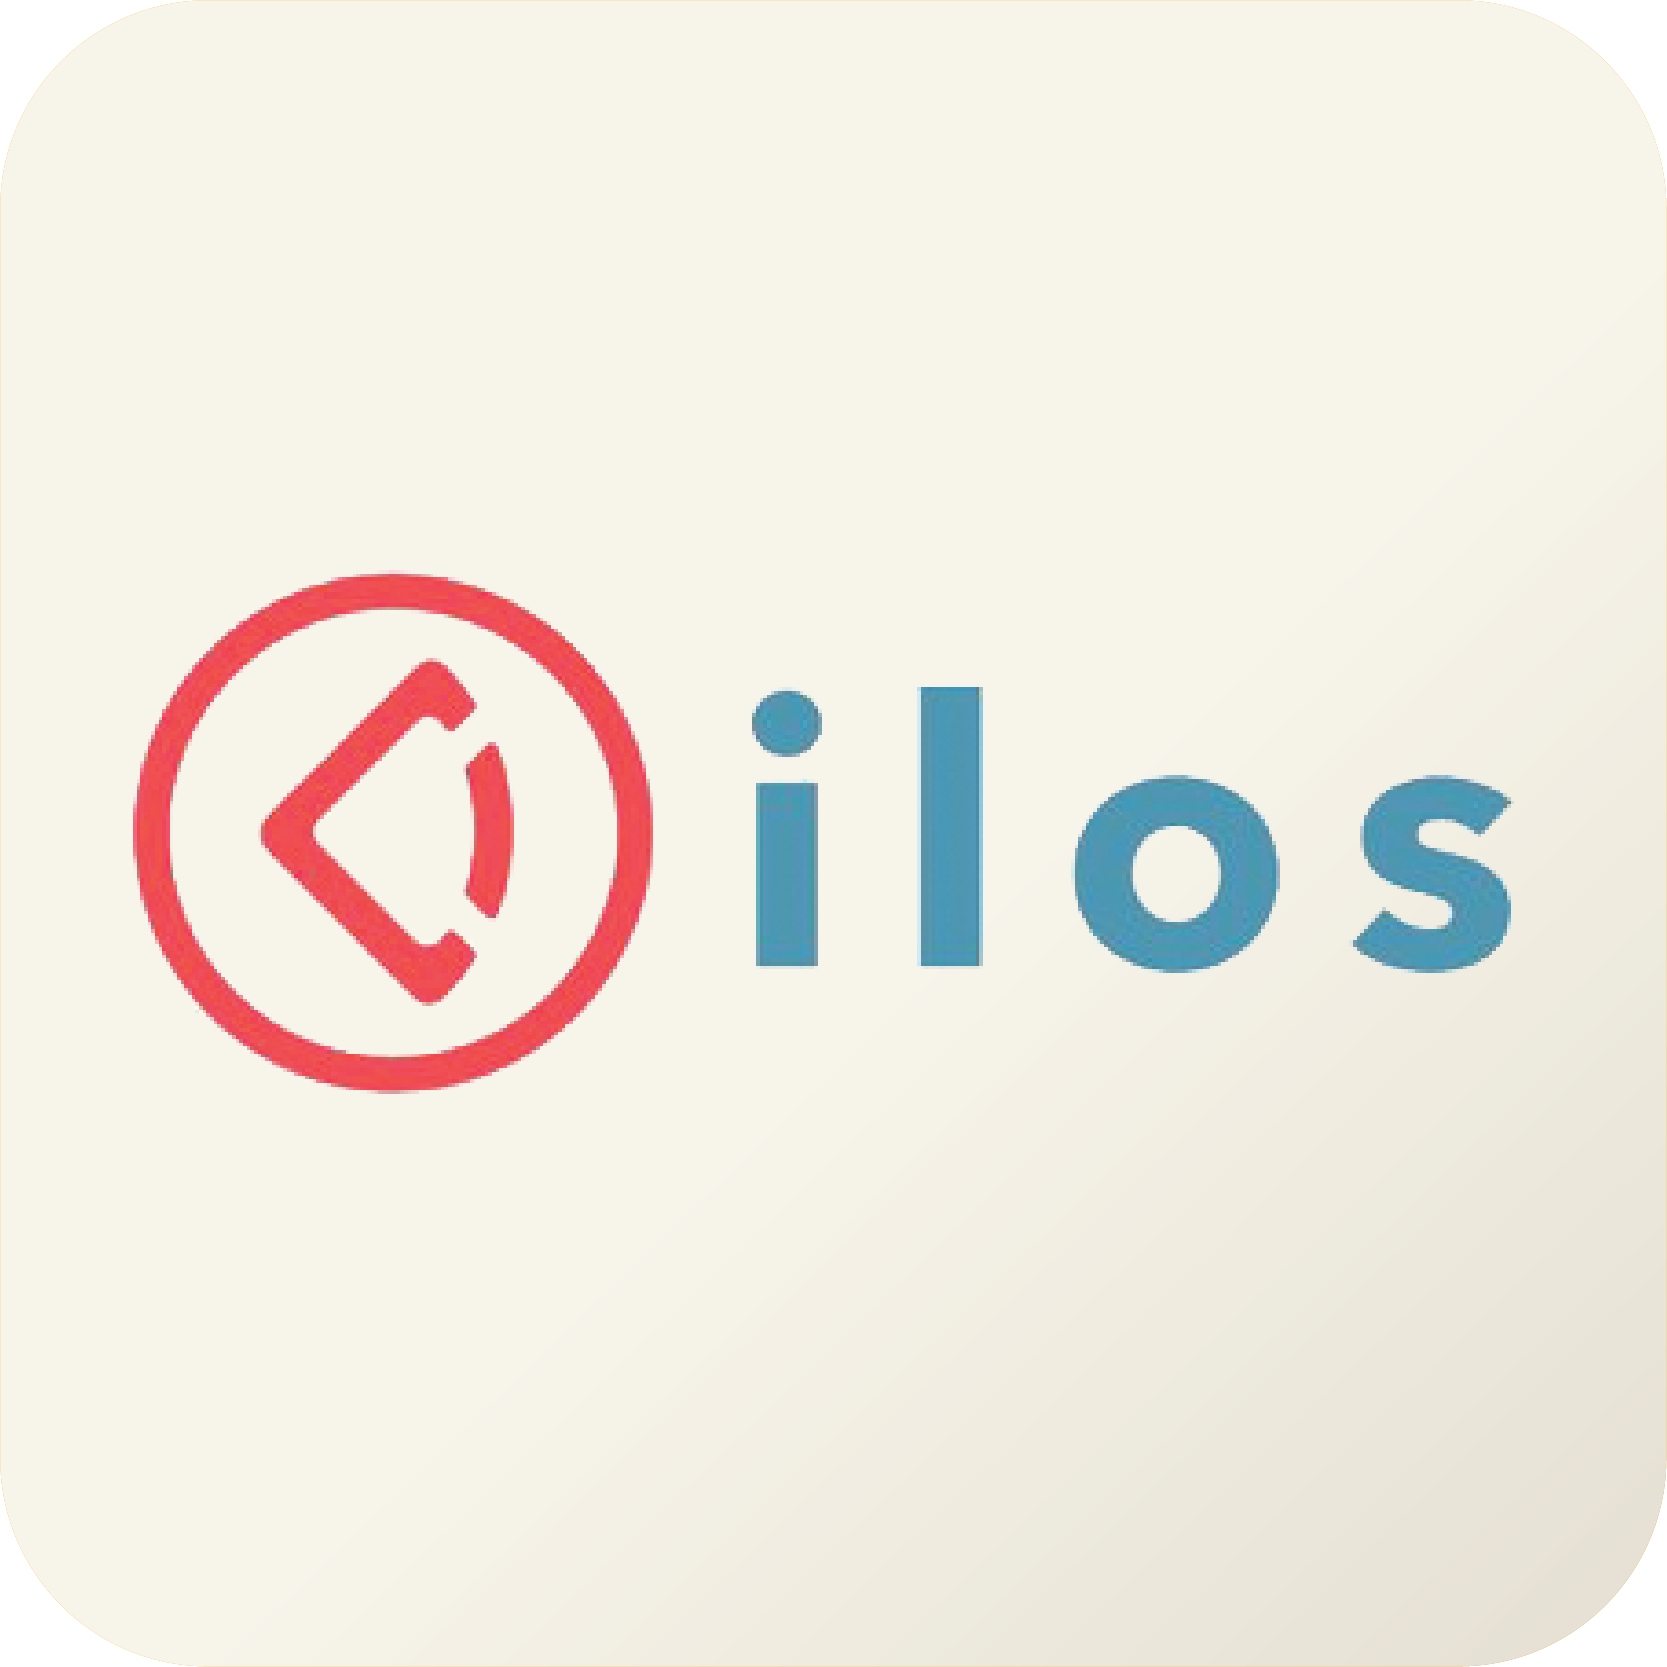 ilos is the University of Nebraska–Lincoln's lecture capture/video hosting service. 